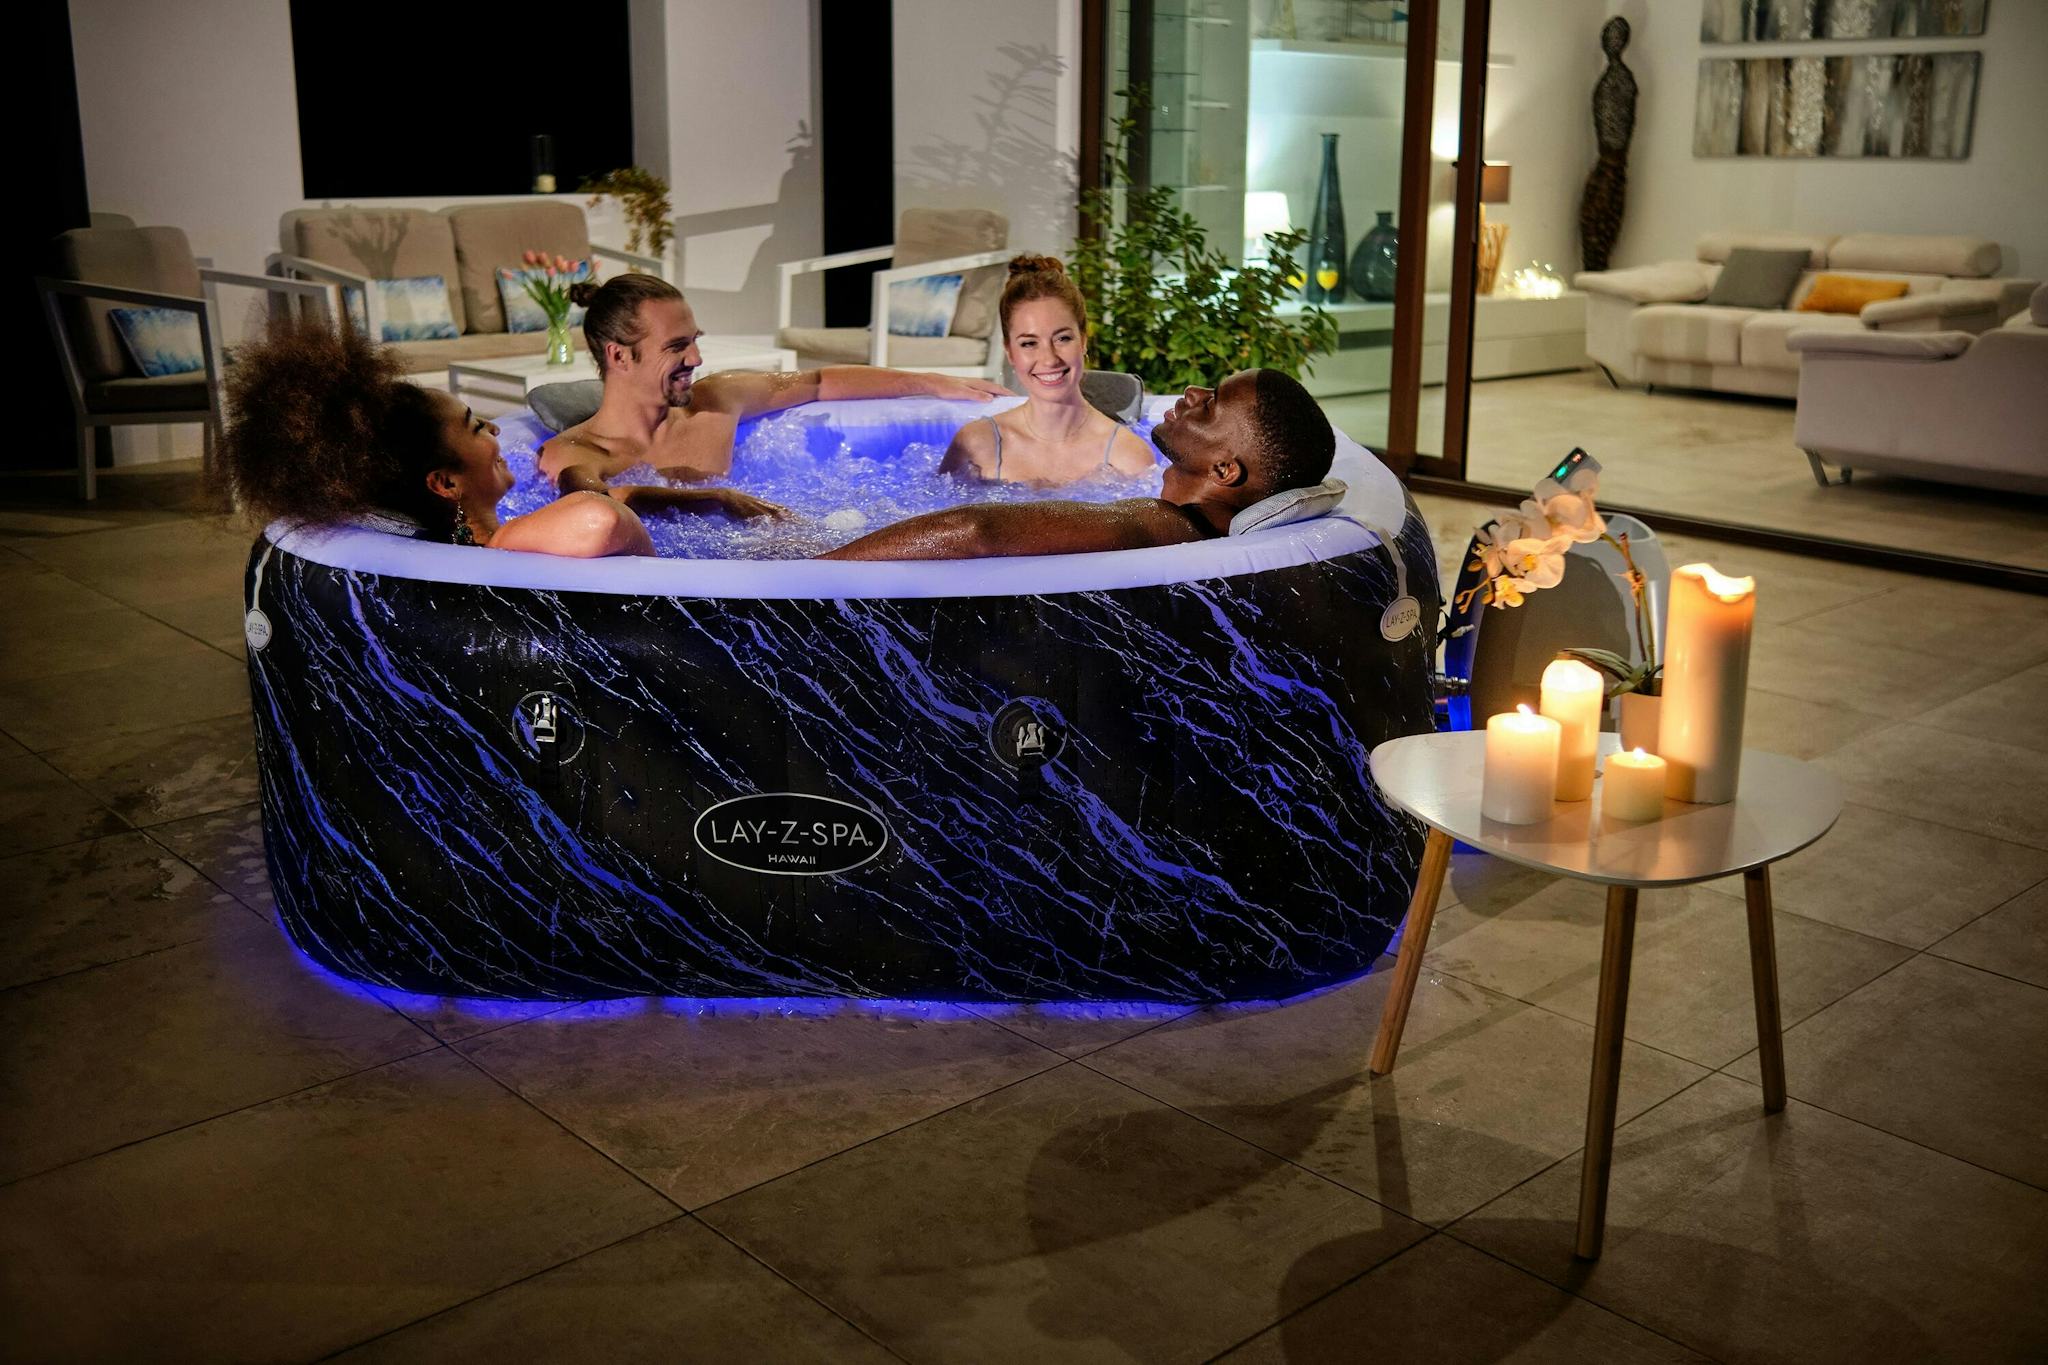 Spas Gonflables Spa gonflable carré Lay-Z-Spa Hawaii Smart Luxe Airjet™ 4 - 6 personnes Bestway 6